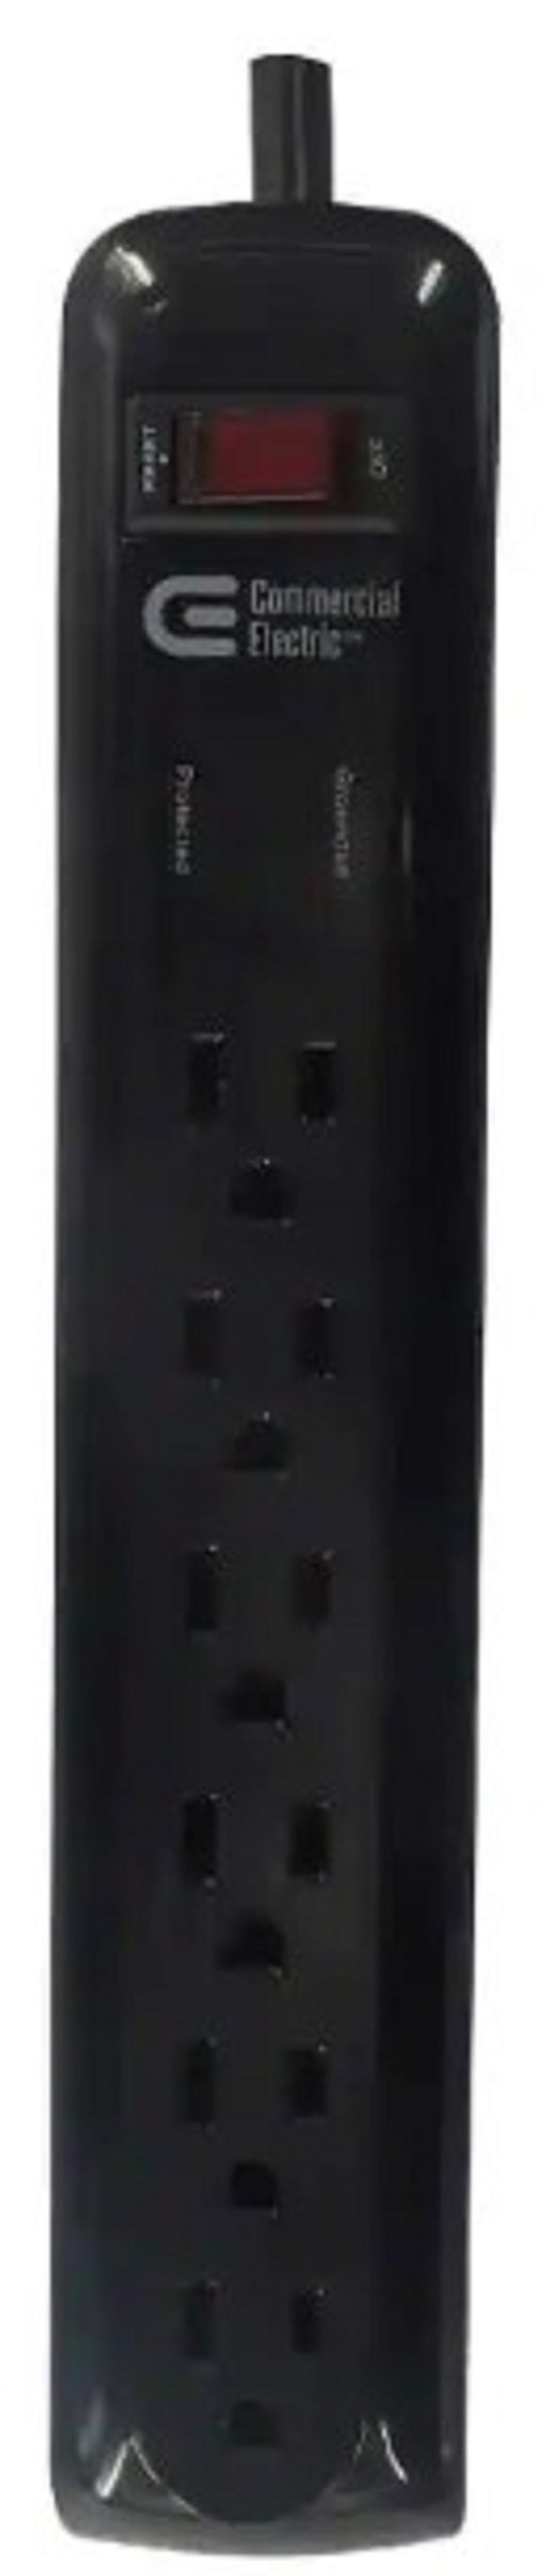 Commercial Electric YLPT-43B 6-Outlet Surge Protector 45 Degree Flat Angle Plug